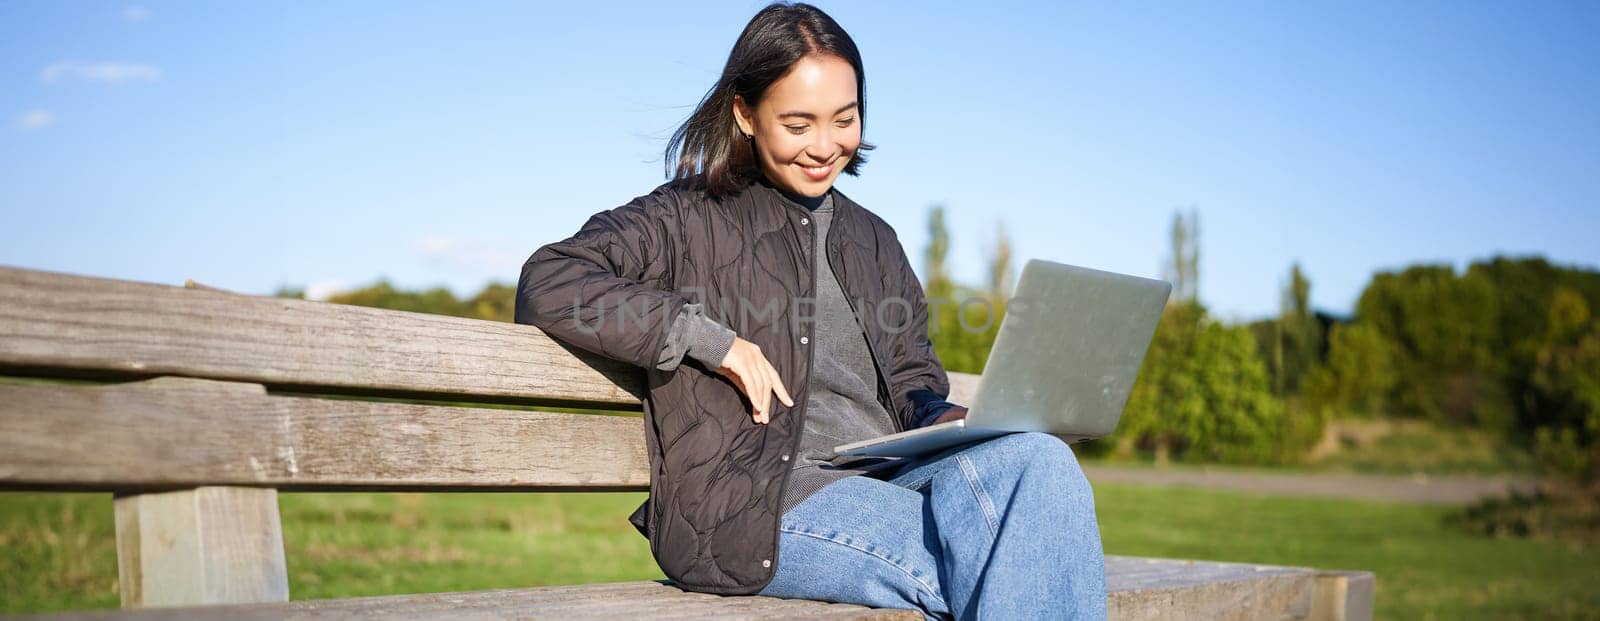 Portrait of smiling woman sitting with laptop, working on project or studying remotely, enjoying being in park.